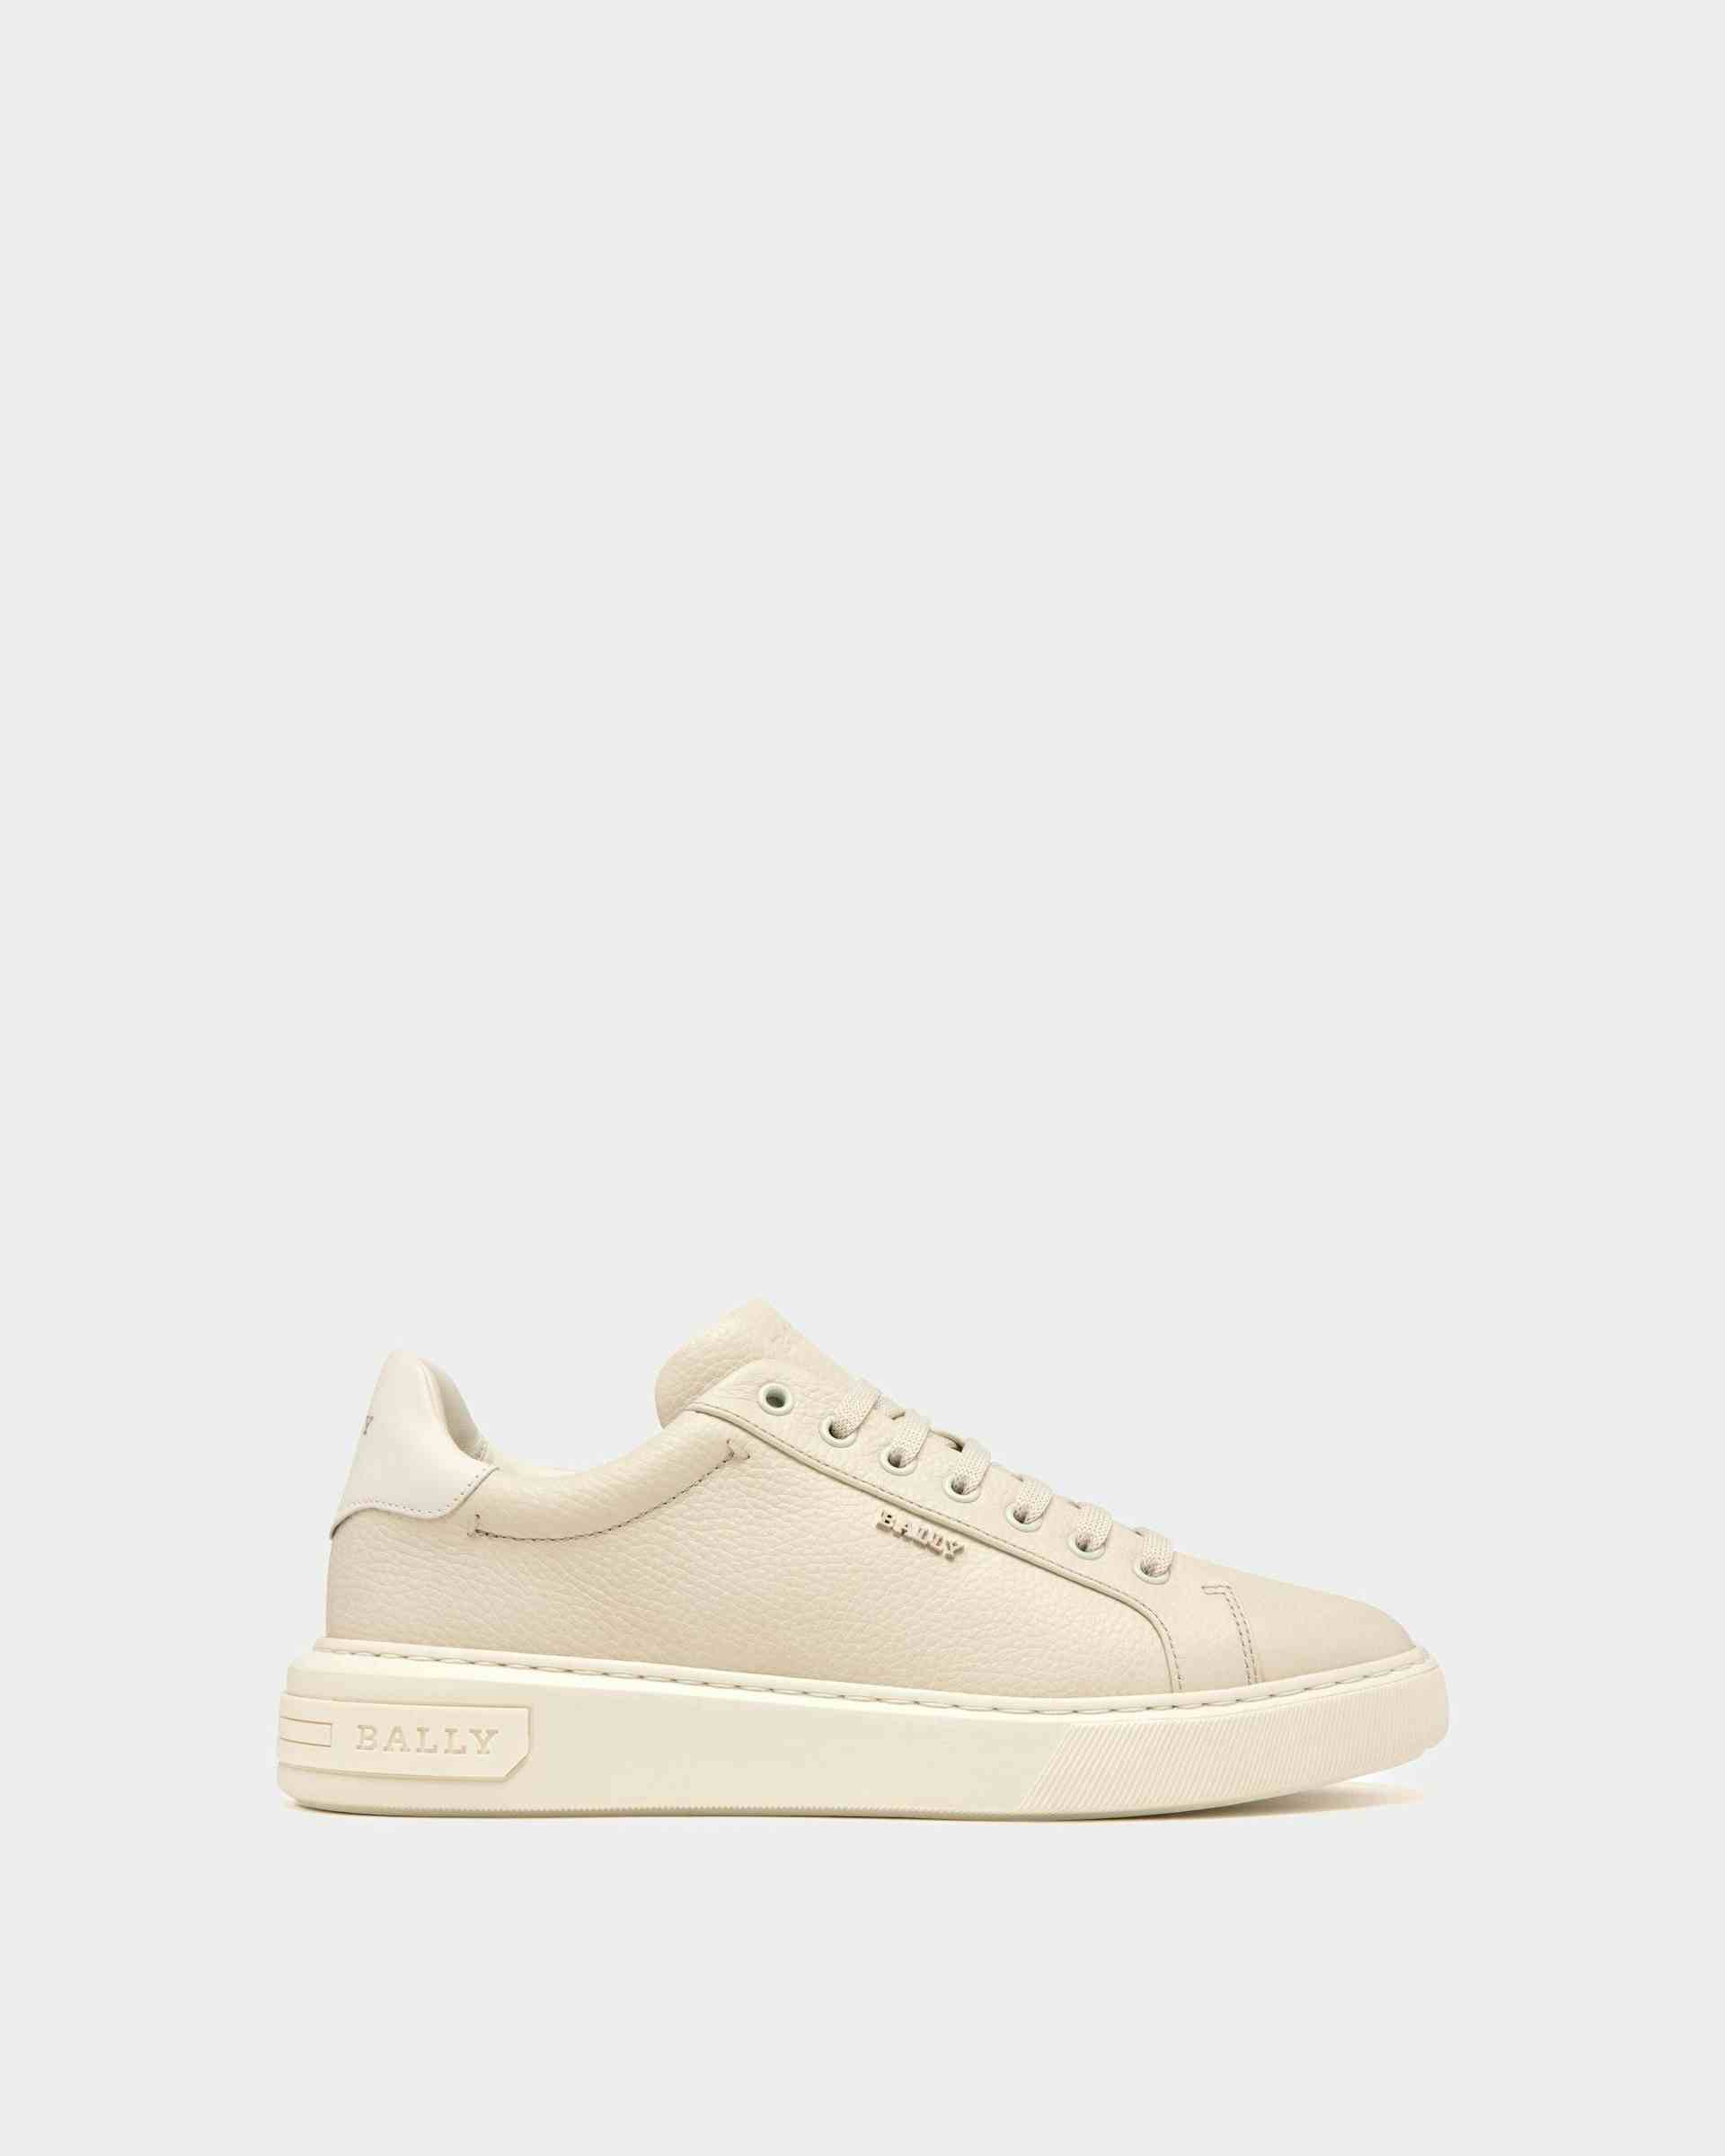 Miky Leather Sneakers In Denty White & White - Men's - Bally